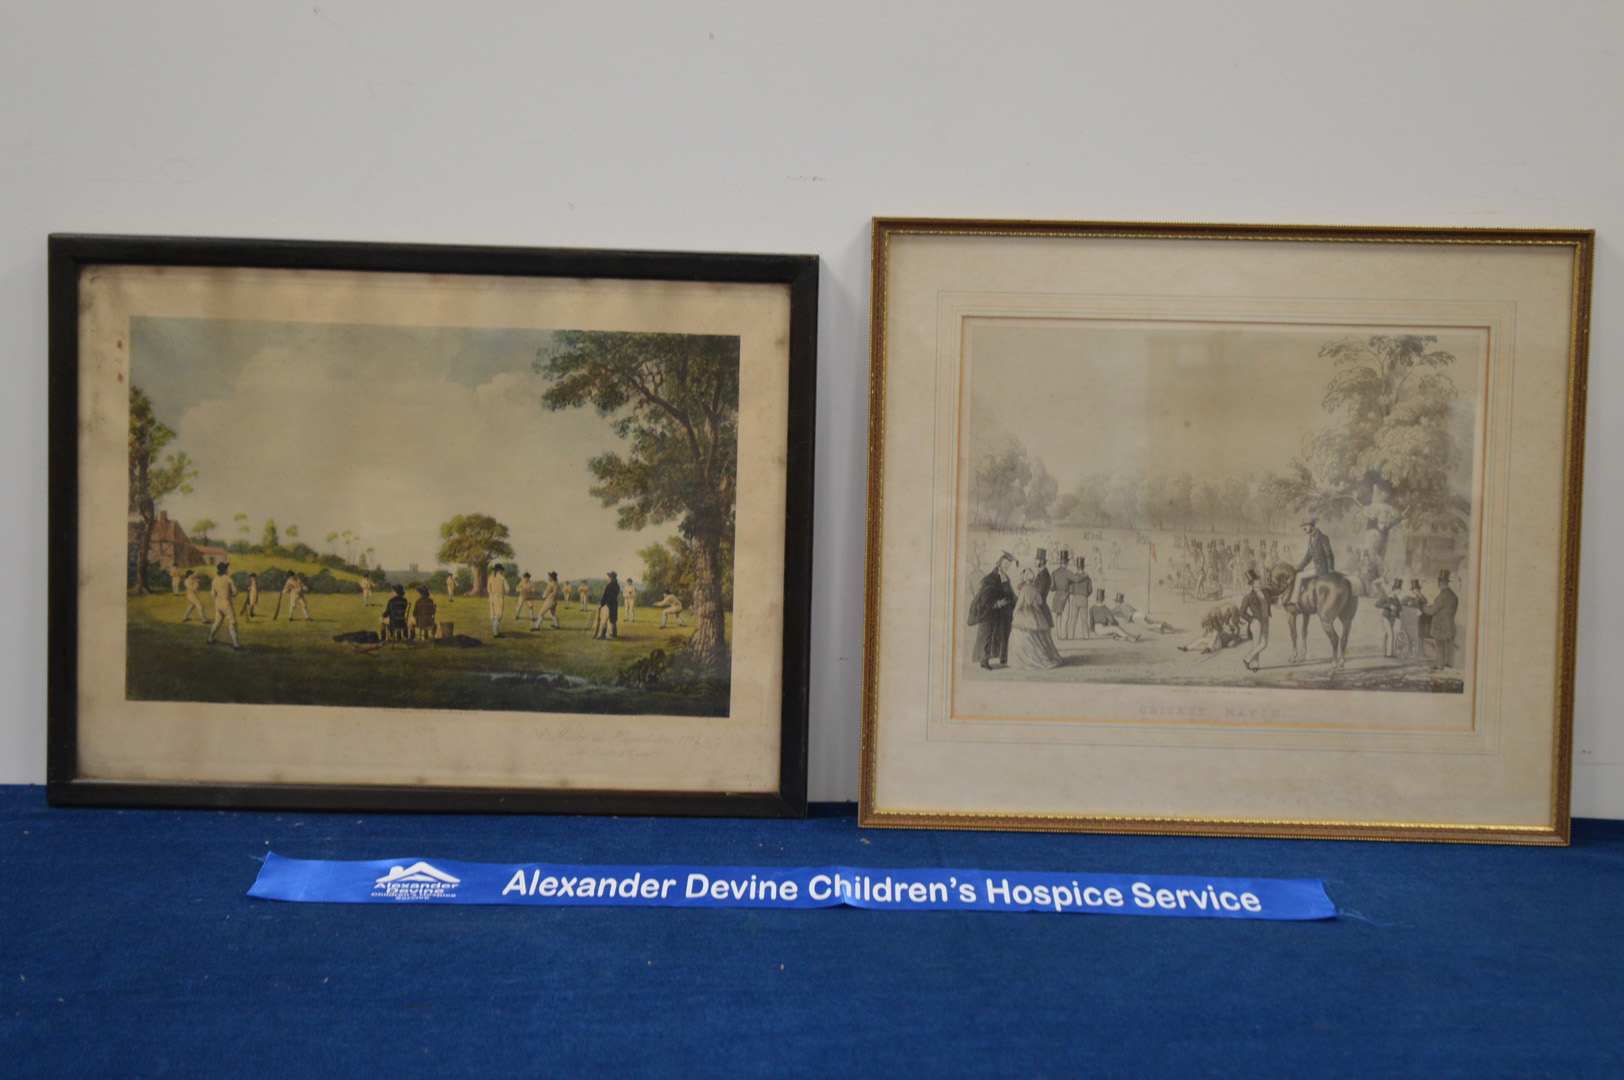 Four framed cricket themed prints/etchings, including Hambledon, the largest 47cm x 54cm